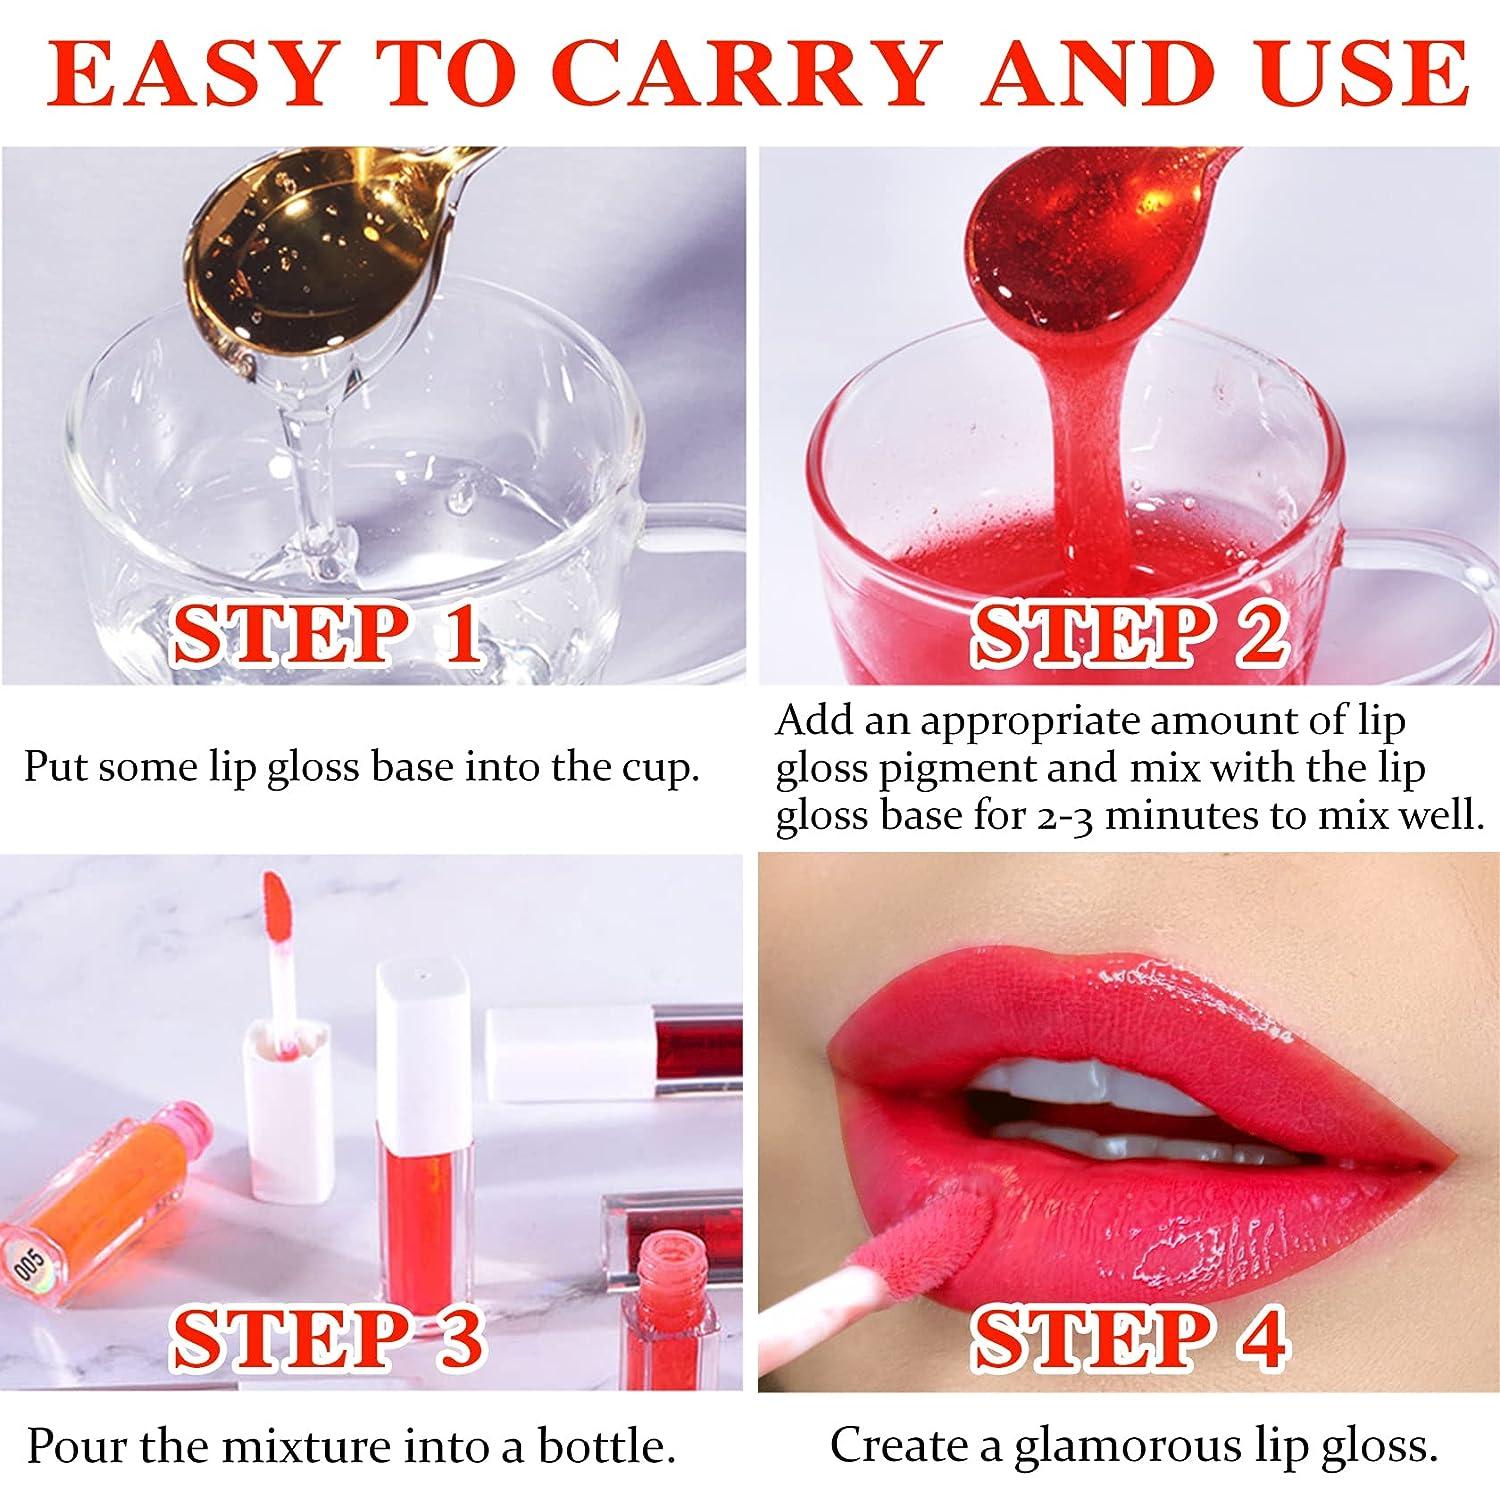 Highly Concentrated Liquid Color Pigment Colorants for Lip Gloss